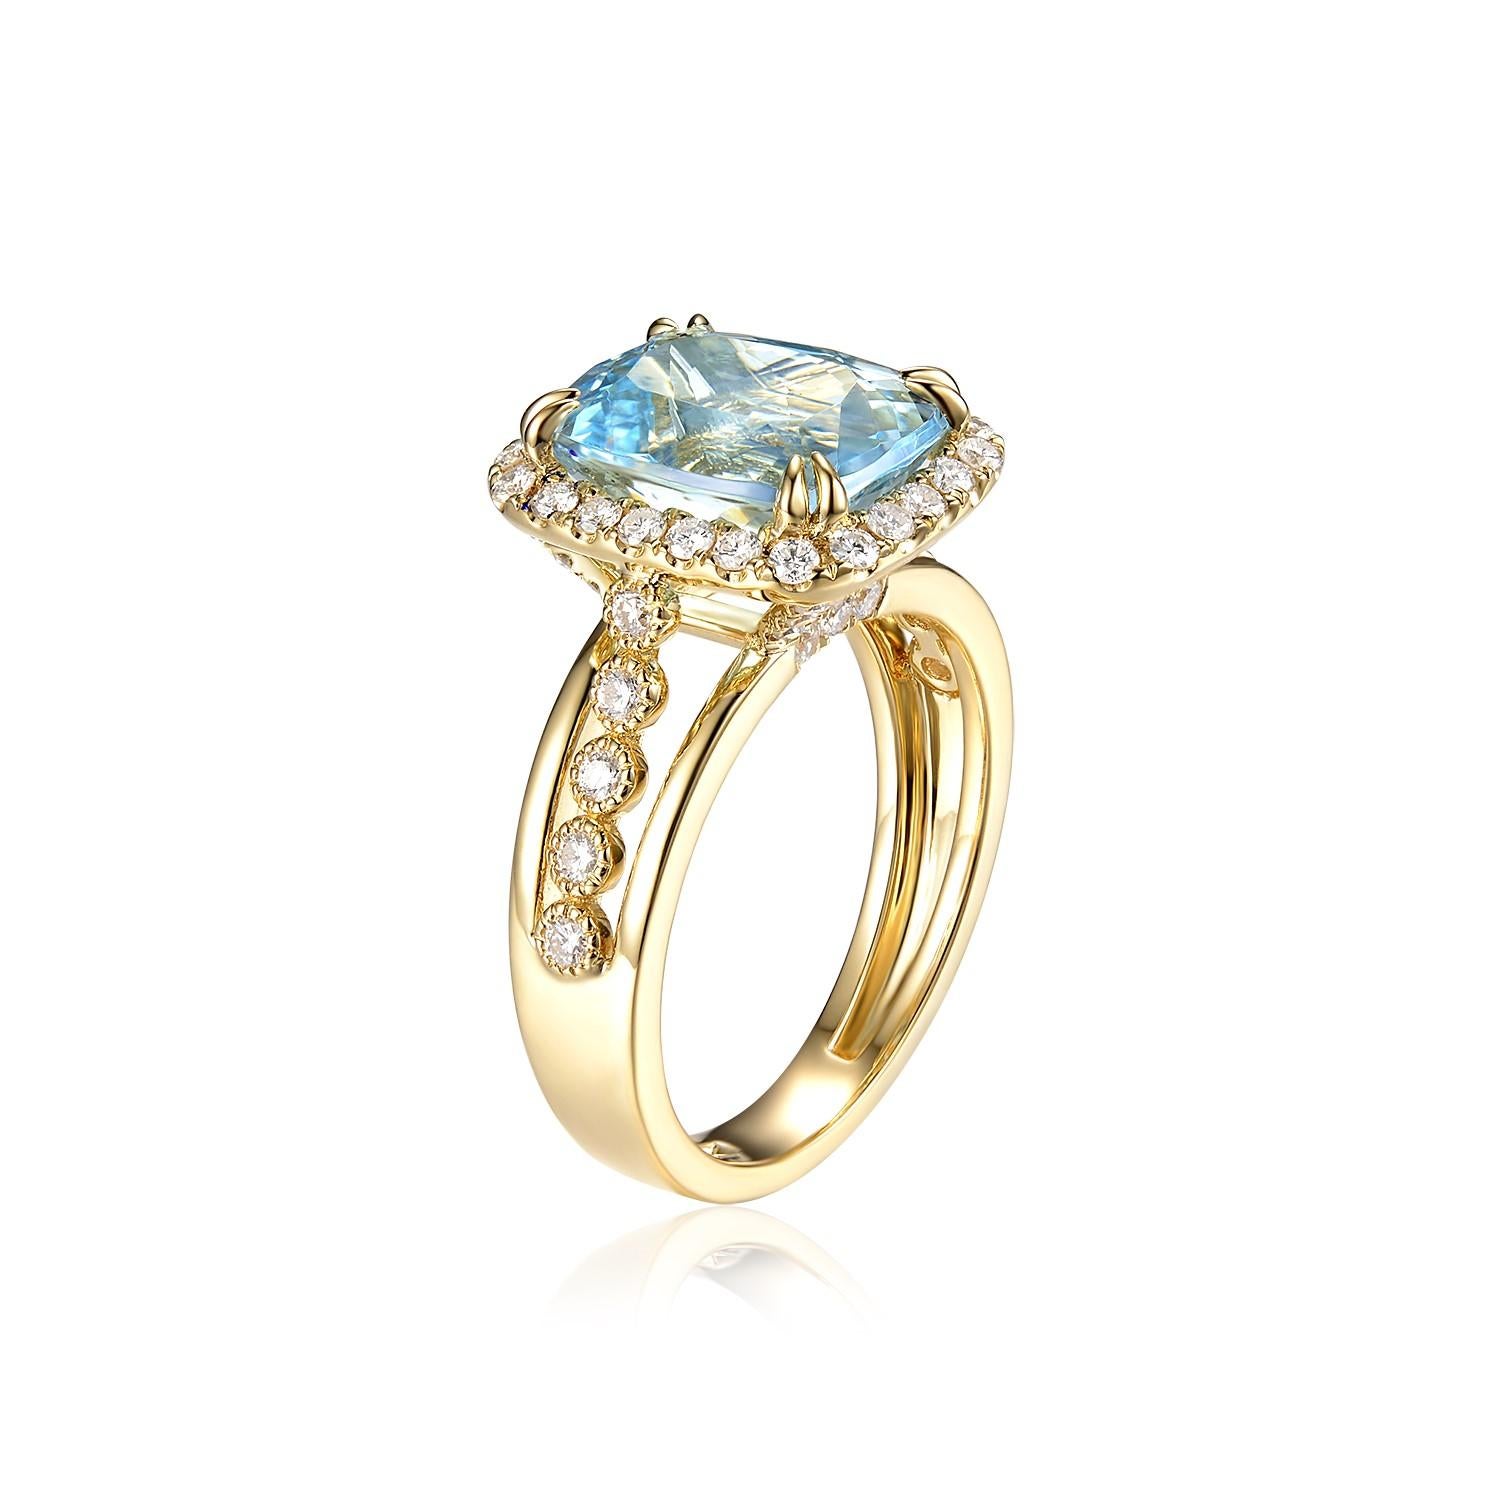 This stunning piece features 3.87 carats of cushion cut aquamarine in the center. The main stone is assented with a diamond halo. A classic yet modern design. 

18 Karat Yellow Gold
Aquamarine 3.87 Carats
White Round Diamonds 0.54 carats